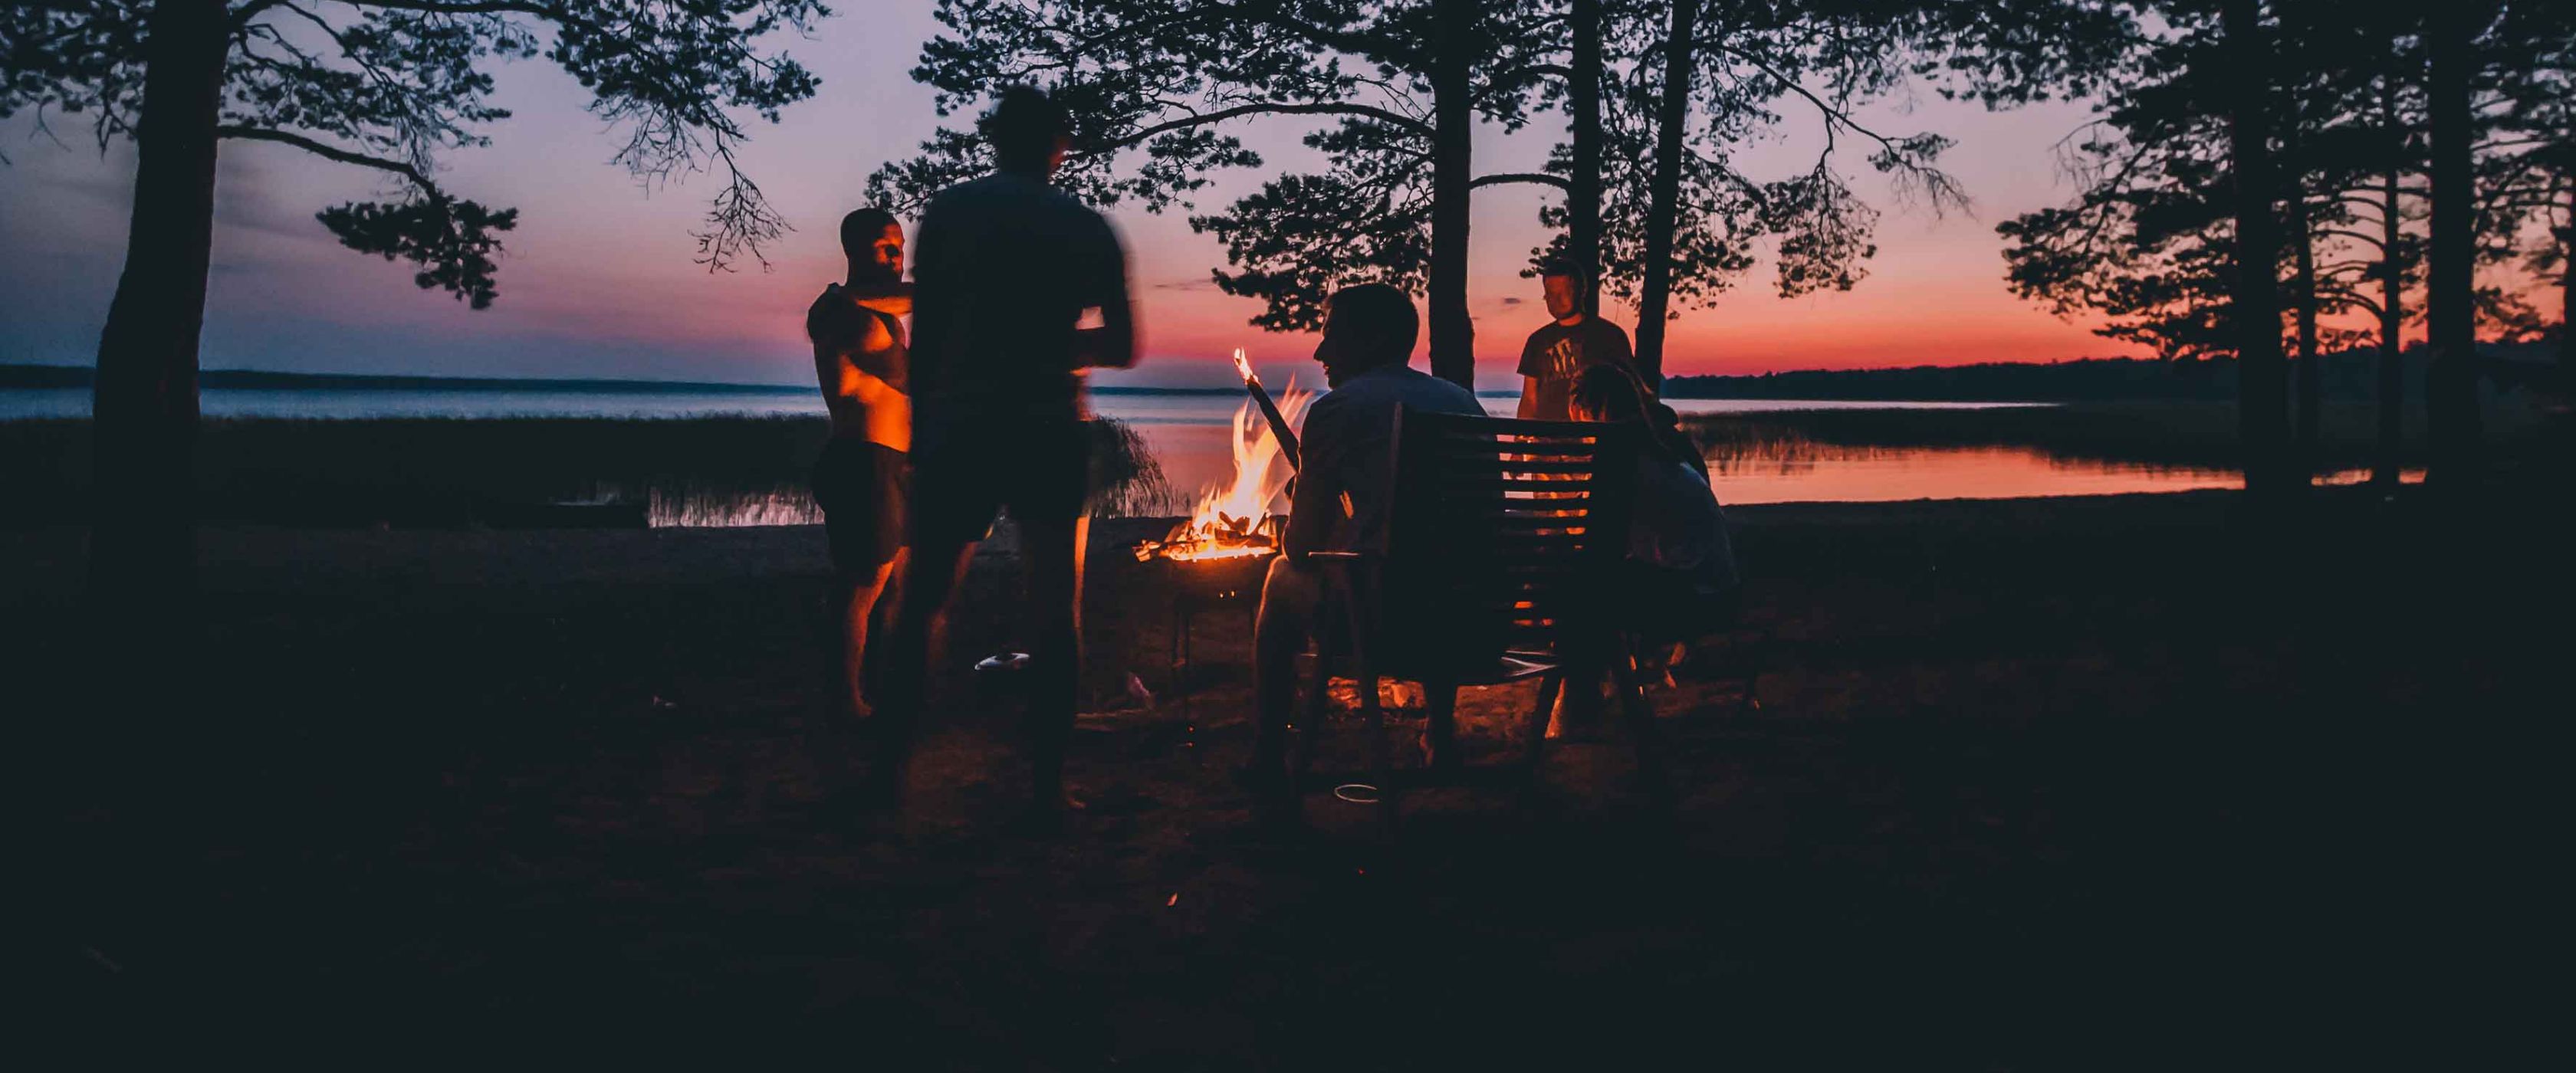 People around a campfire 